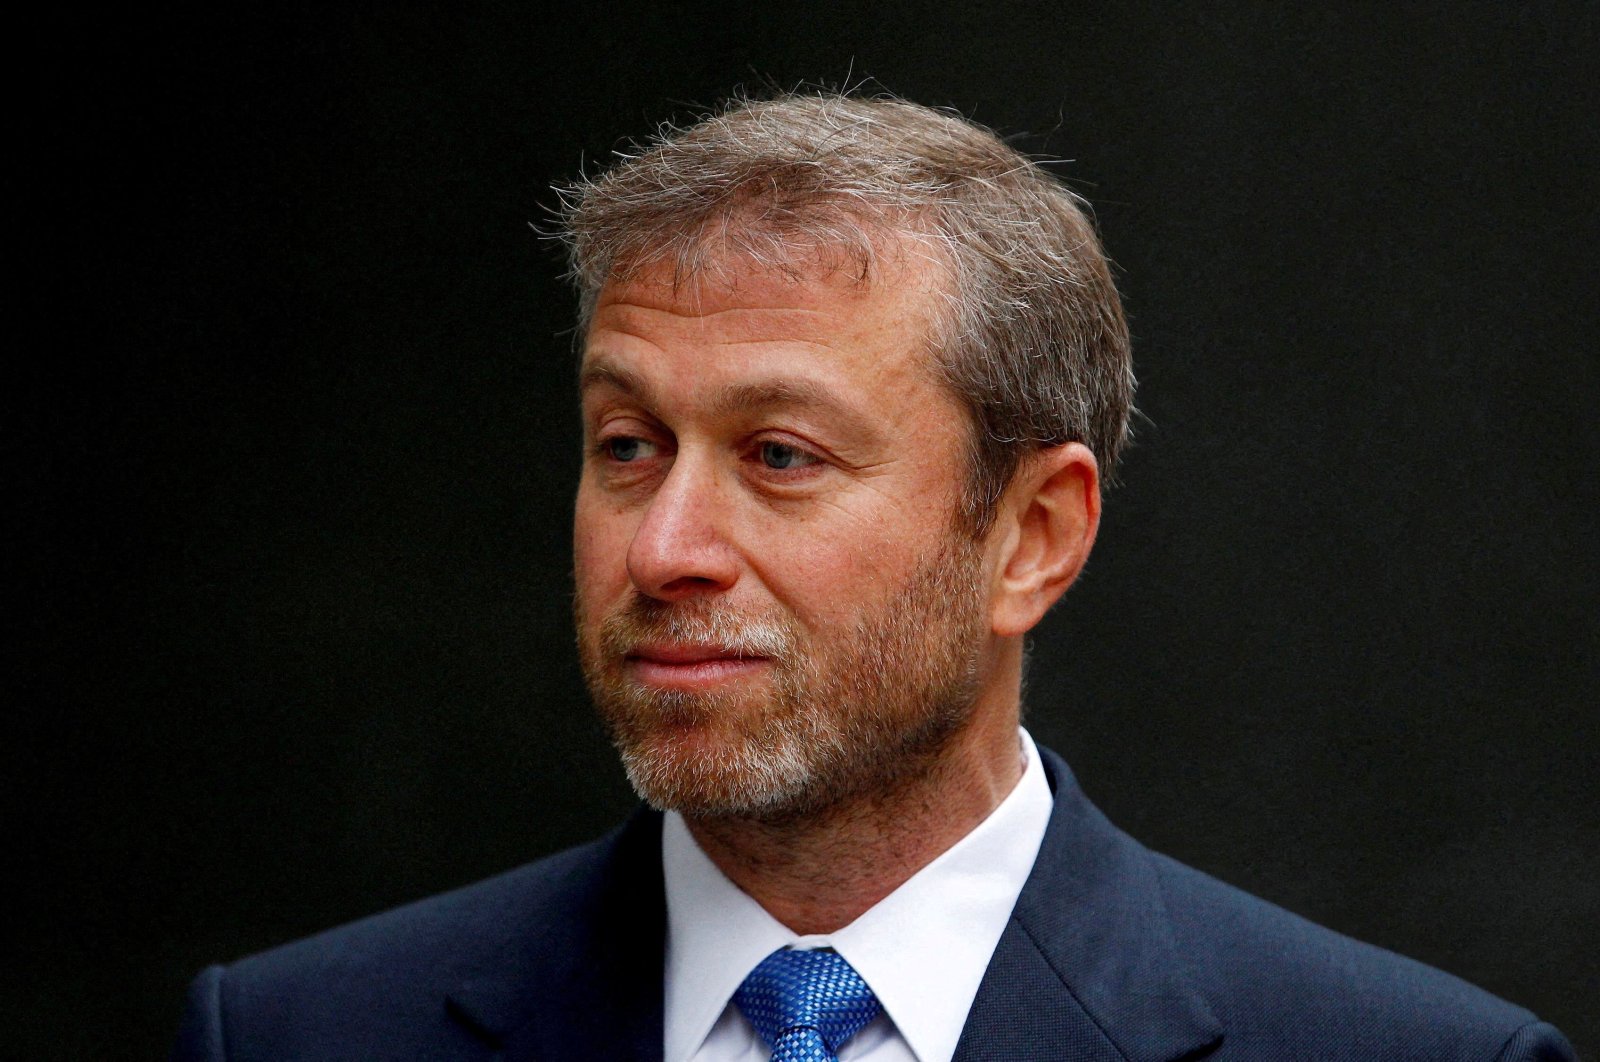 Russian billionaire and then-owner of Chelsea Roman Abramovich arrives at a division of the High Court, London, England, Oct. 31, 2011. (Reuters Photo)